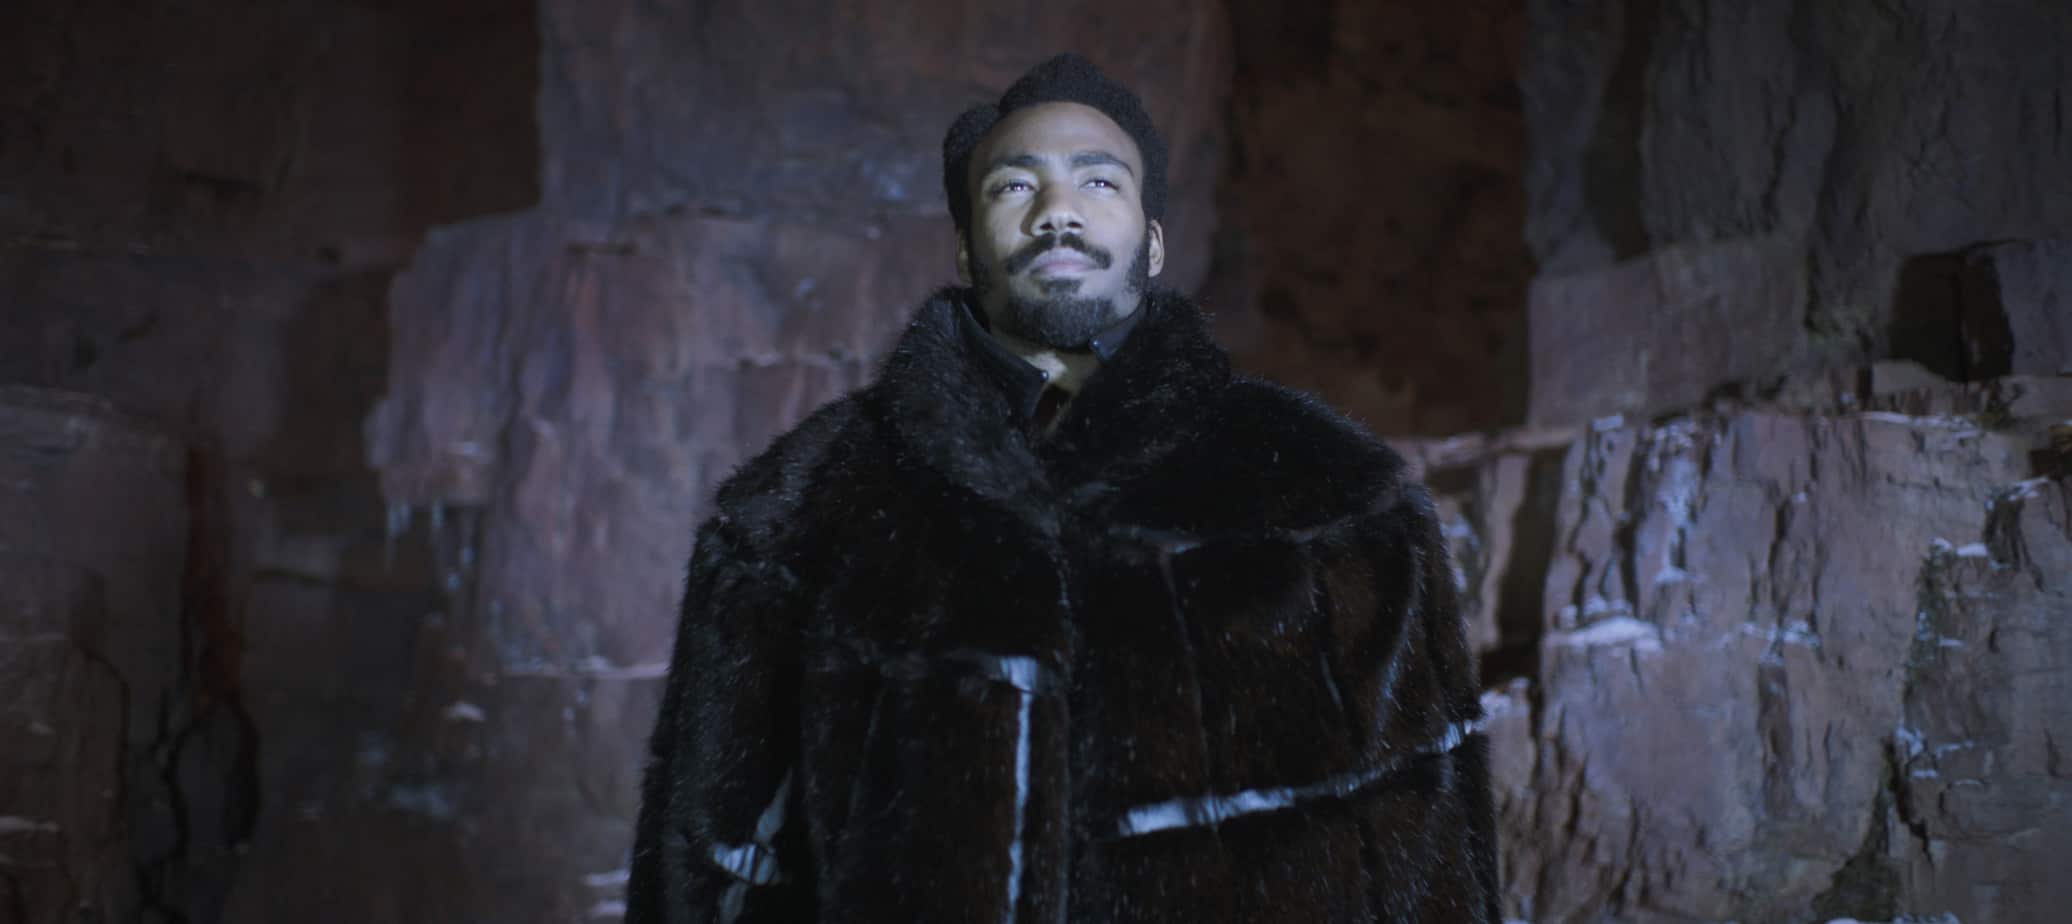 Donald Glover as Lando in Solo: A Star Wars Story Solo movie trailer